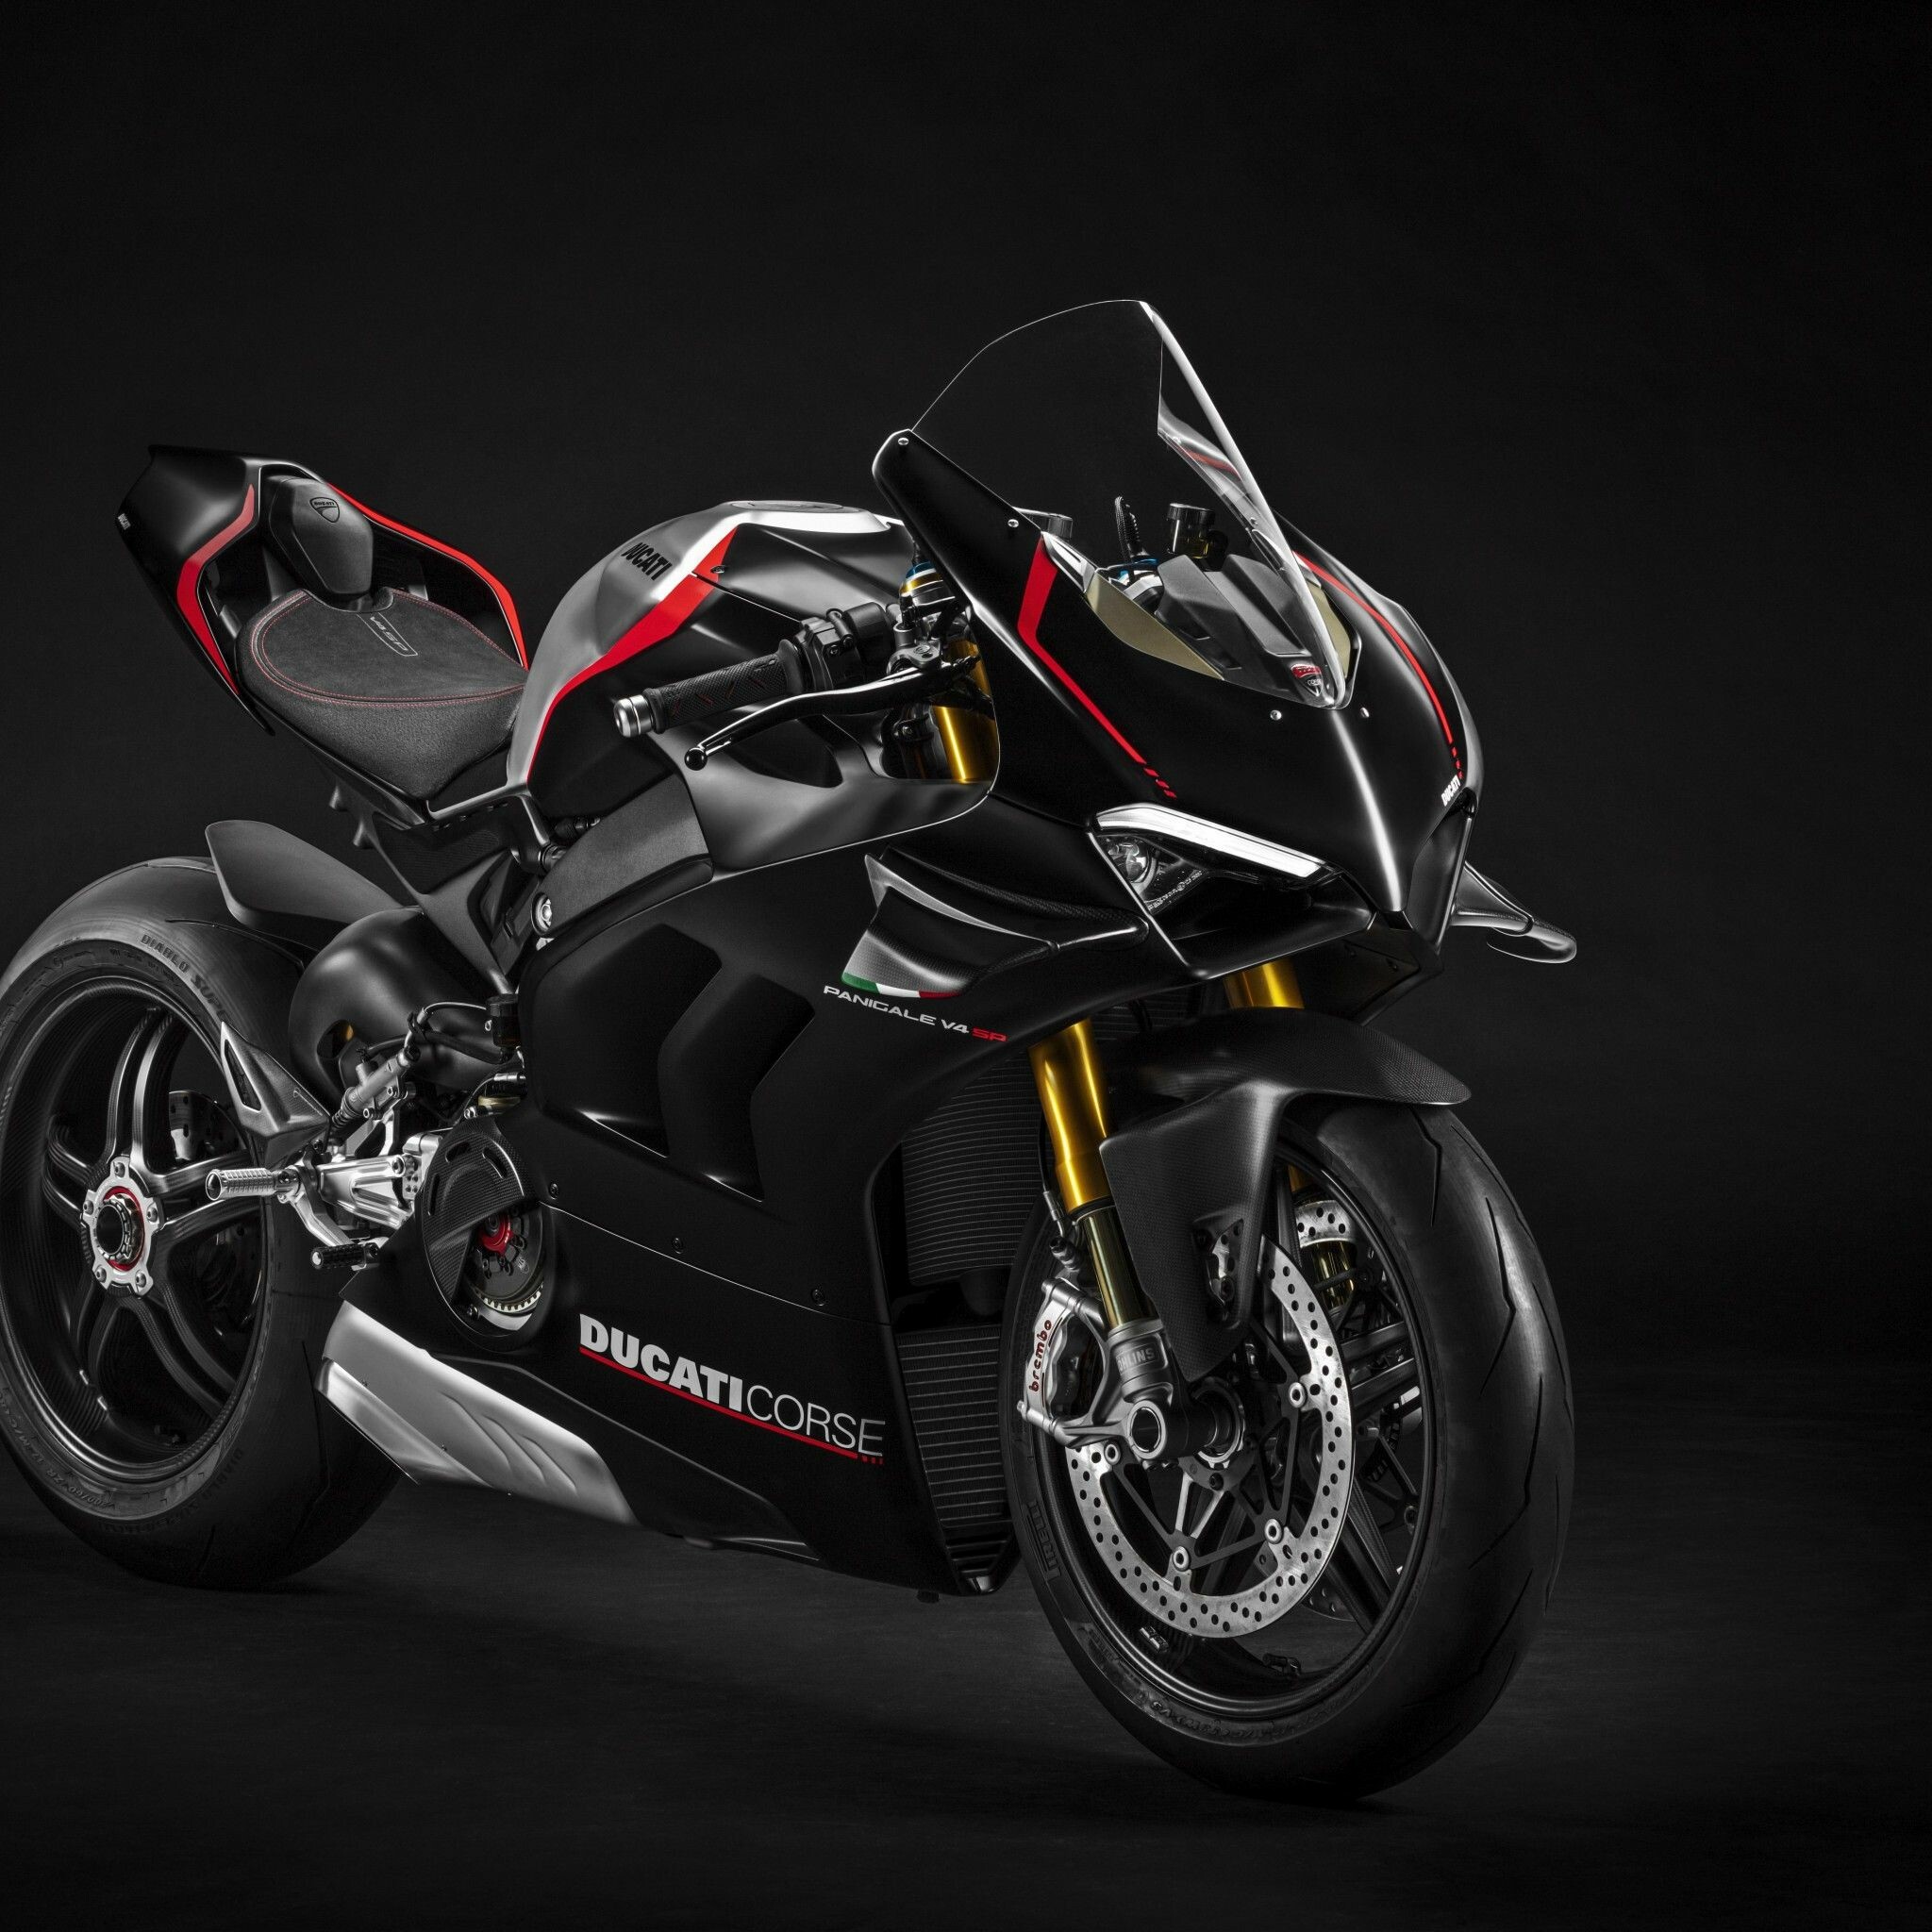 Ducati: Panigale, Produced the fastest 250 cc road bike then available, the Mach 1, in 1964. 2050x2050 HD Wallpaper.